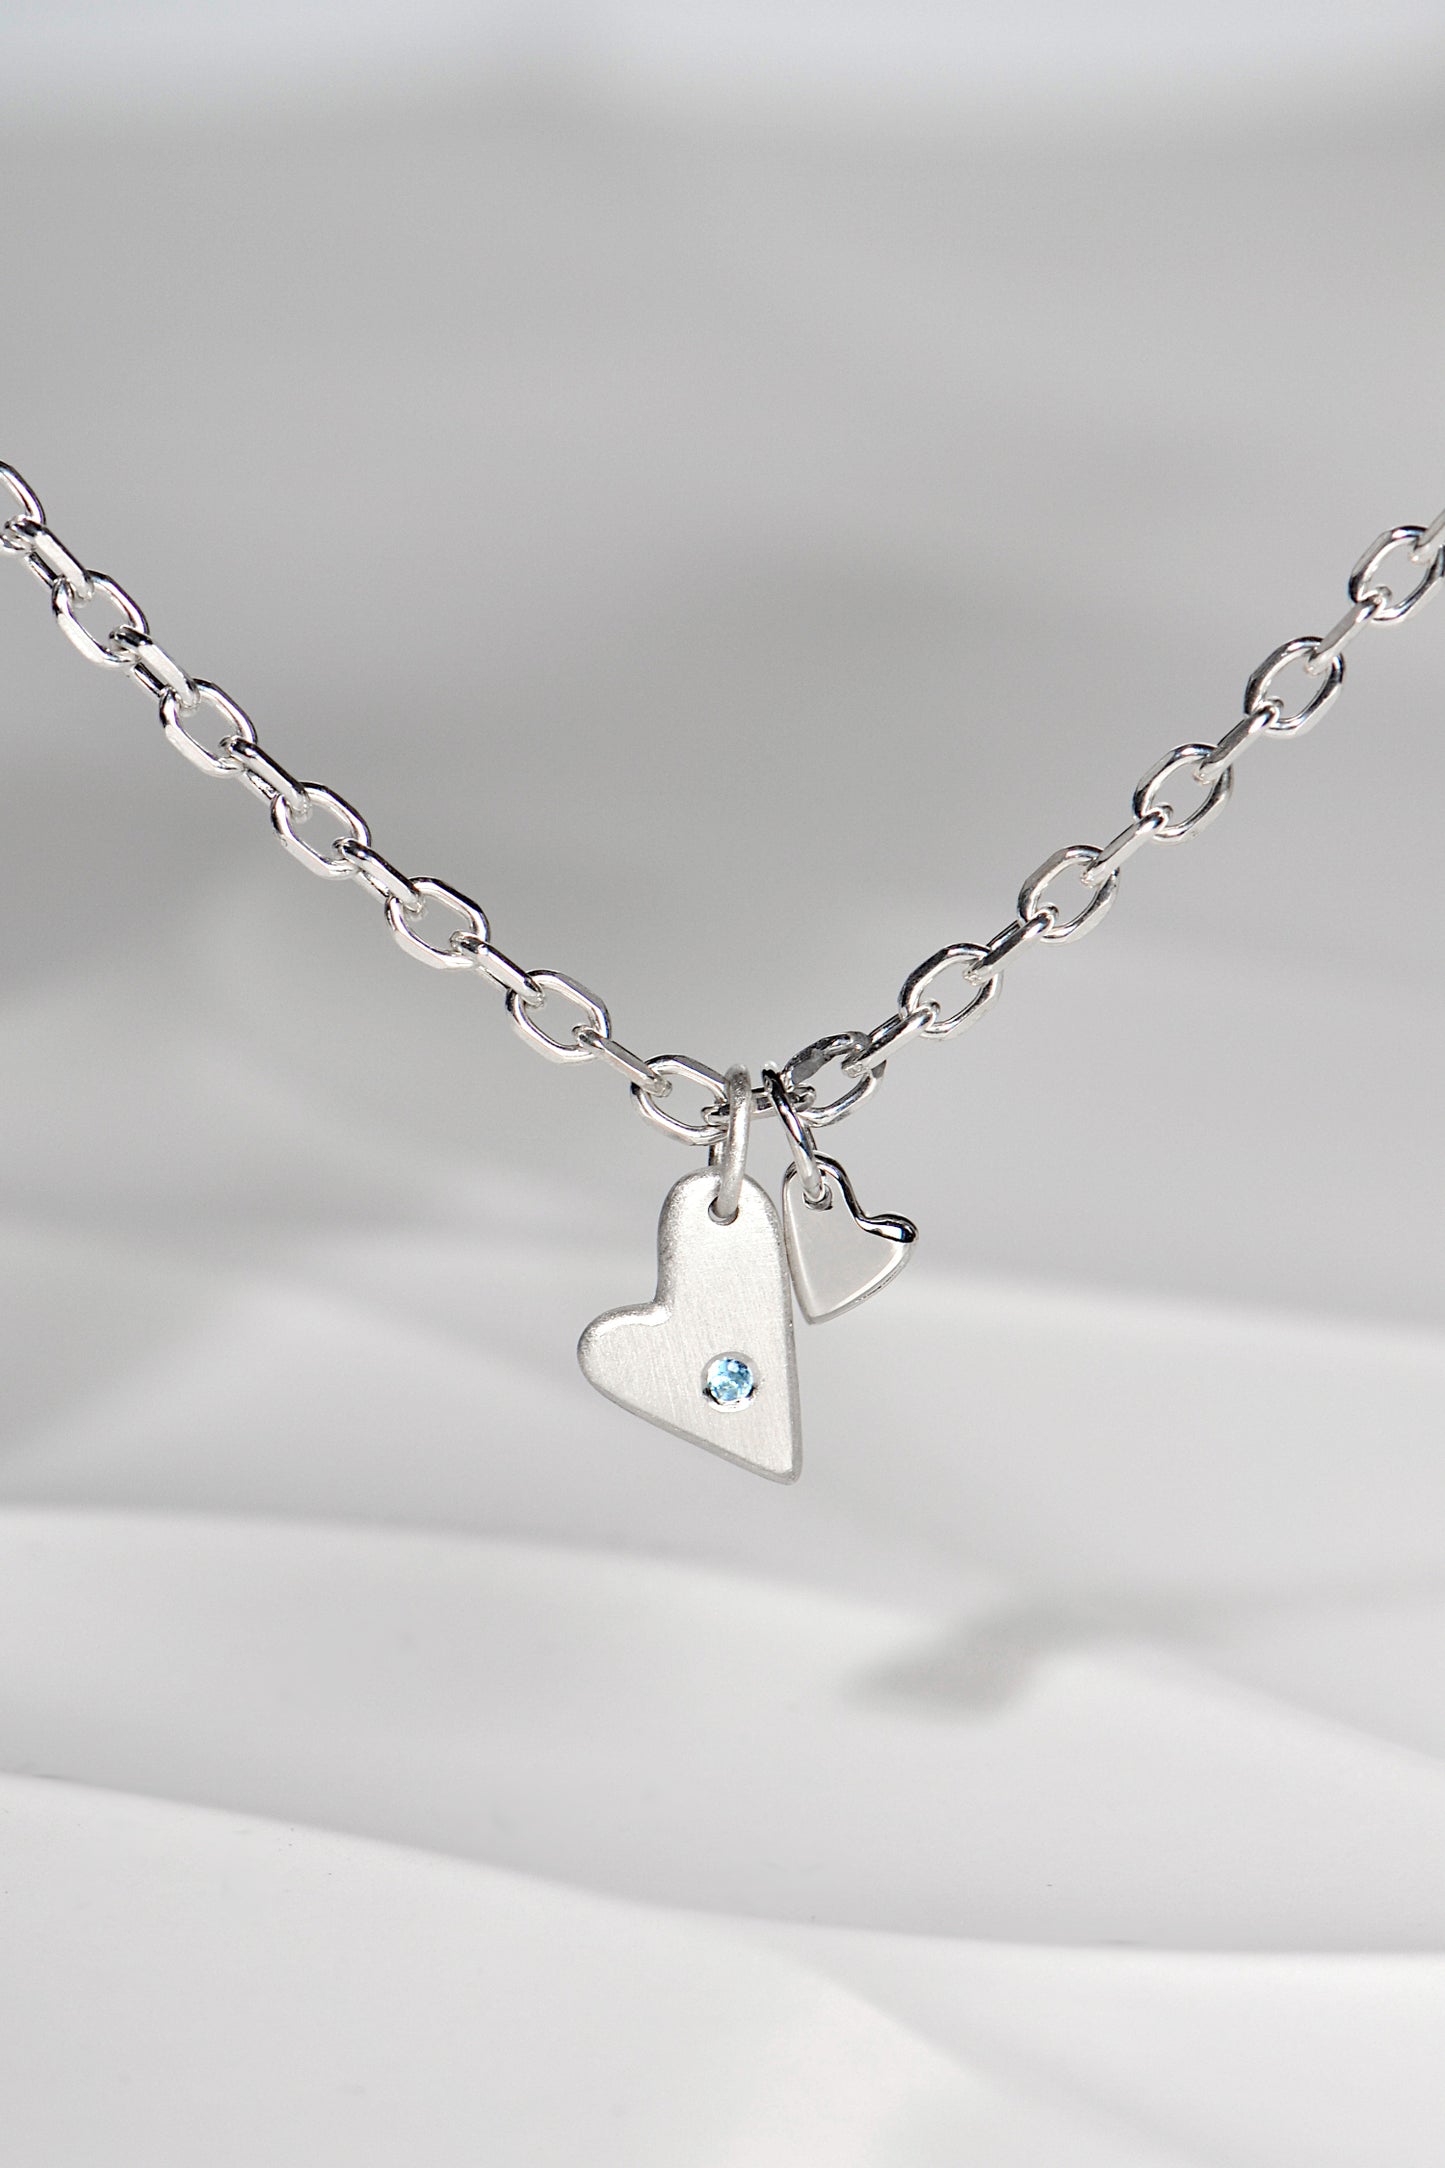 From the Heart aquamarine necklace